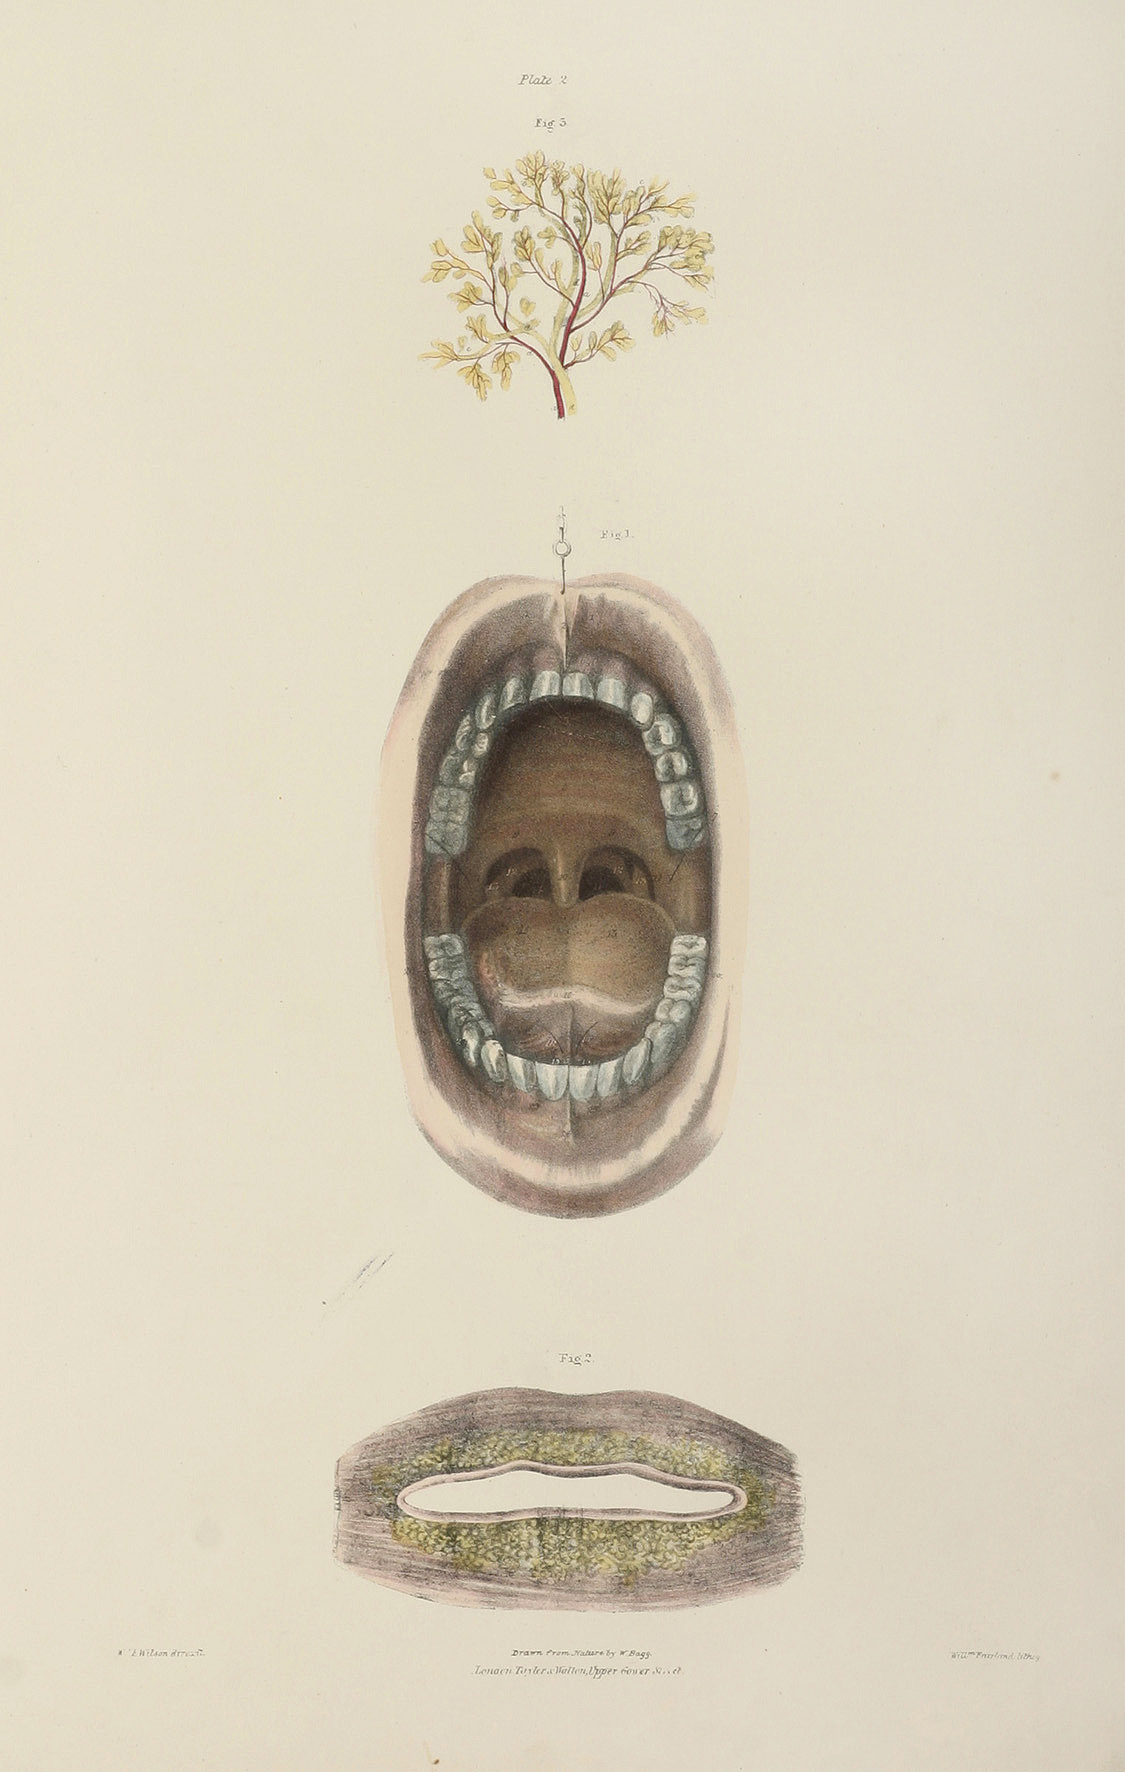 Anatomy of the Mouth, the Mucous Glands, and the development of the Parotid Gland. - Antique Print from 1838